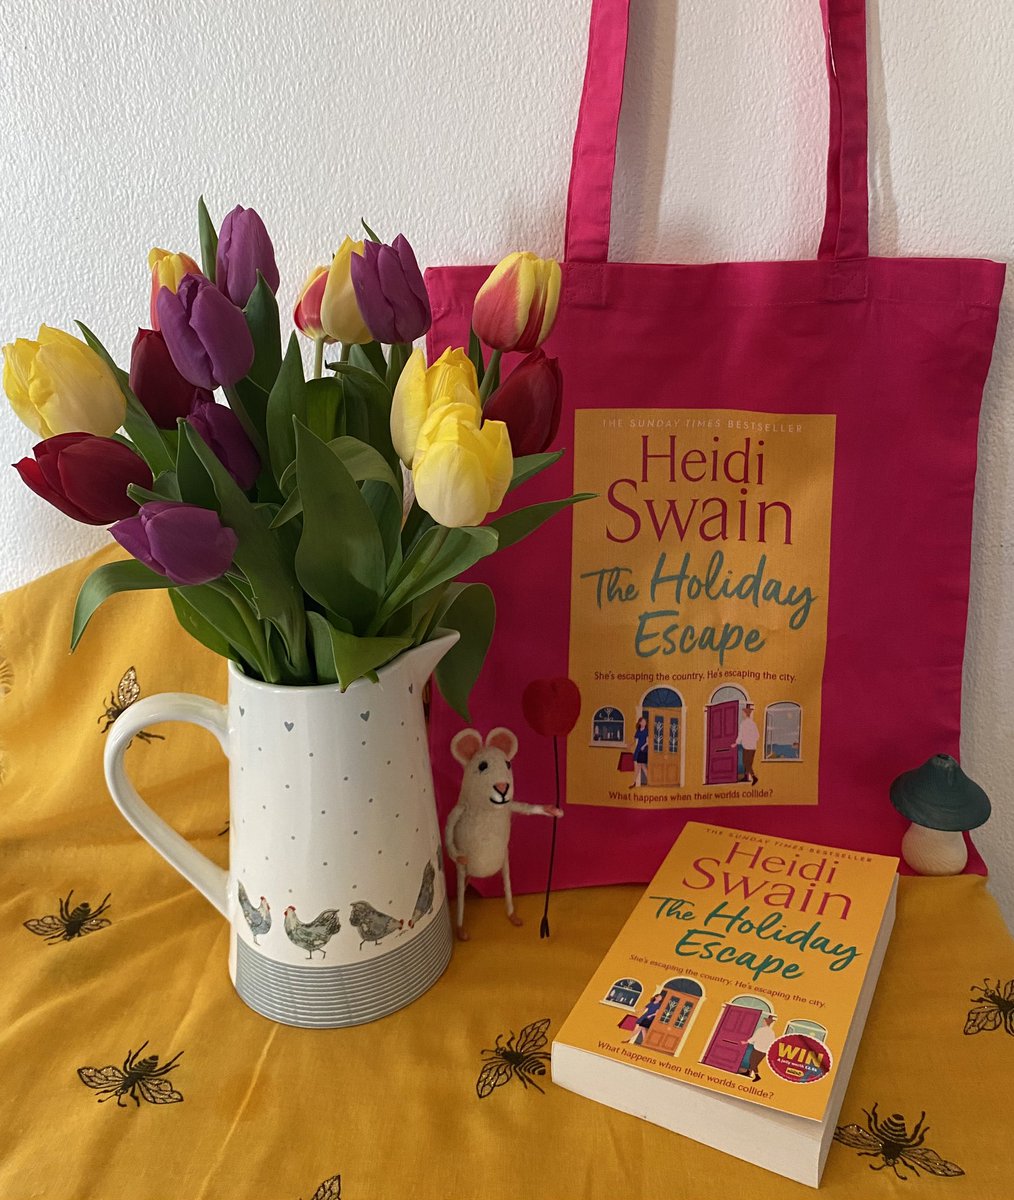 Thank you @Heidi_Swain for my beautiful bag and book 💛💖 Absolutely thrilled and honoured by your kindness in dedicating this book to me 🥰♥️ #soulsisters #theholidayescape #kittiwakecove #dorset